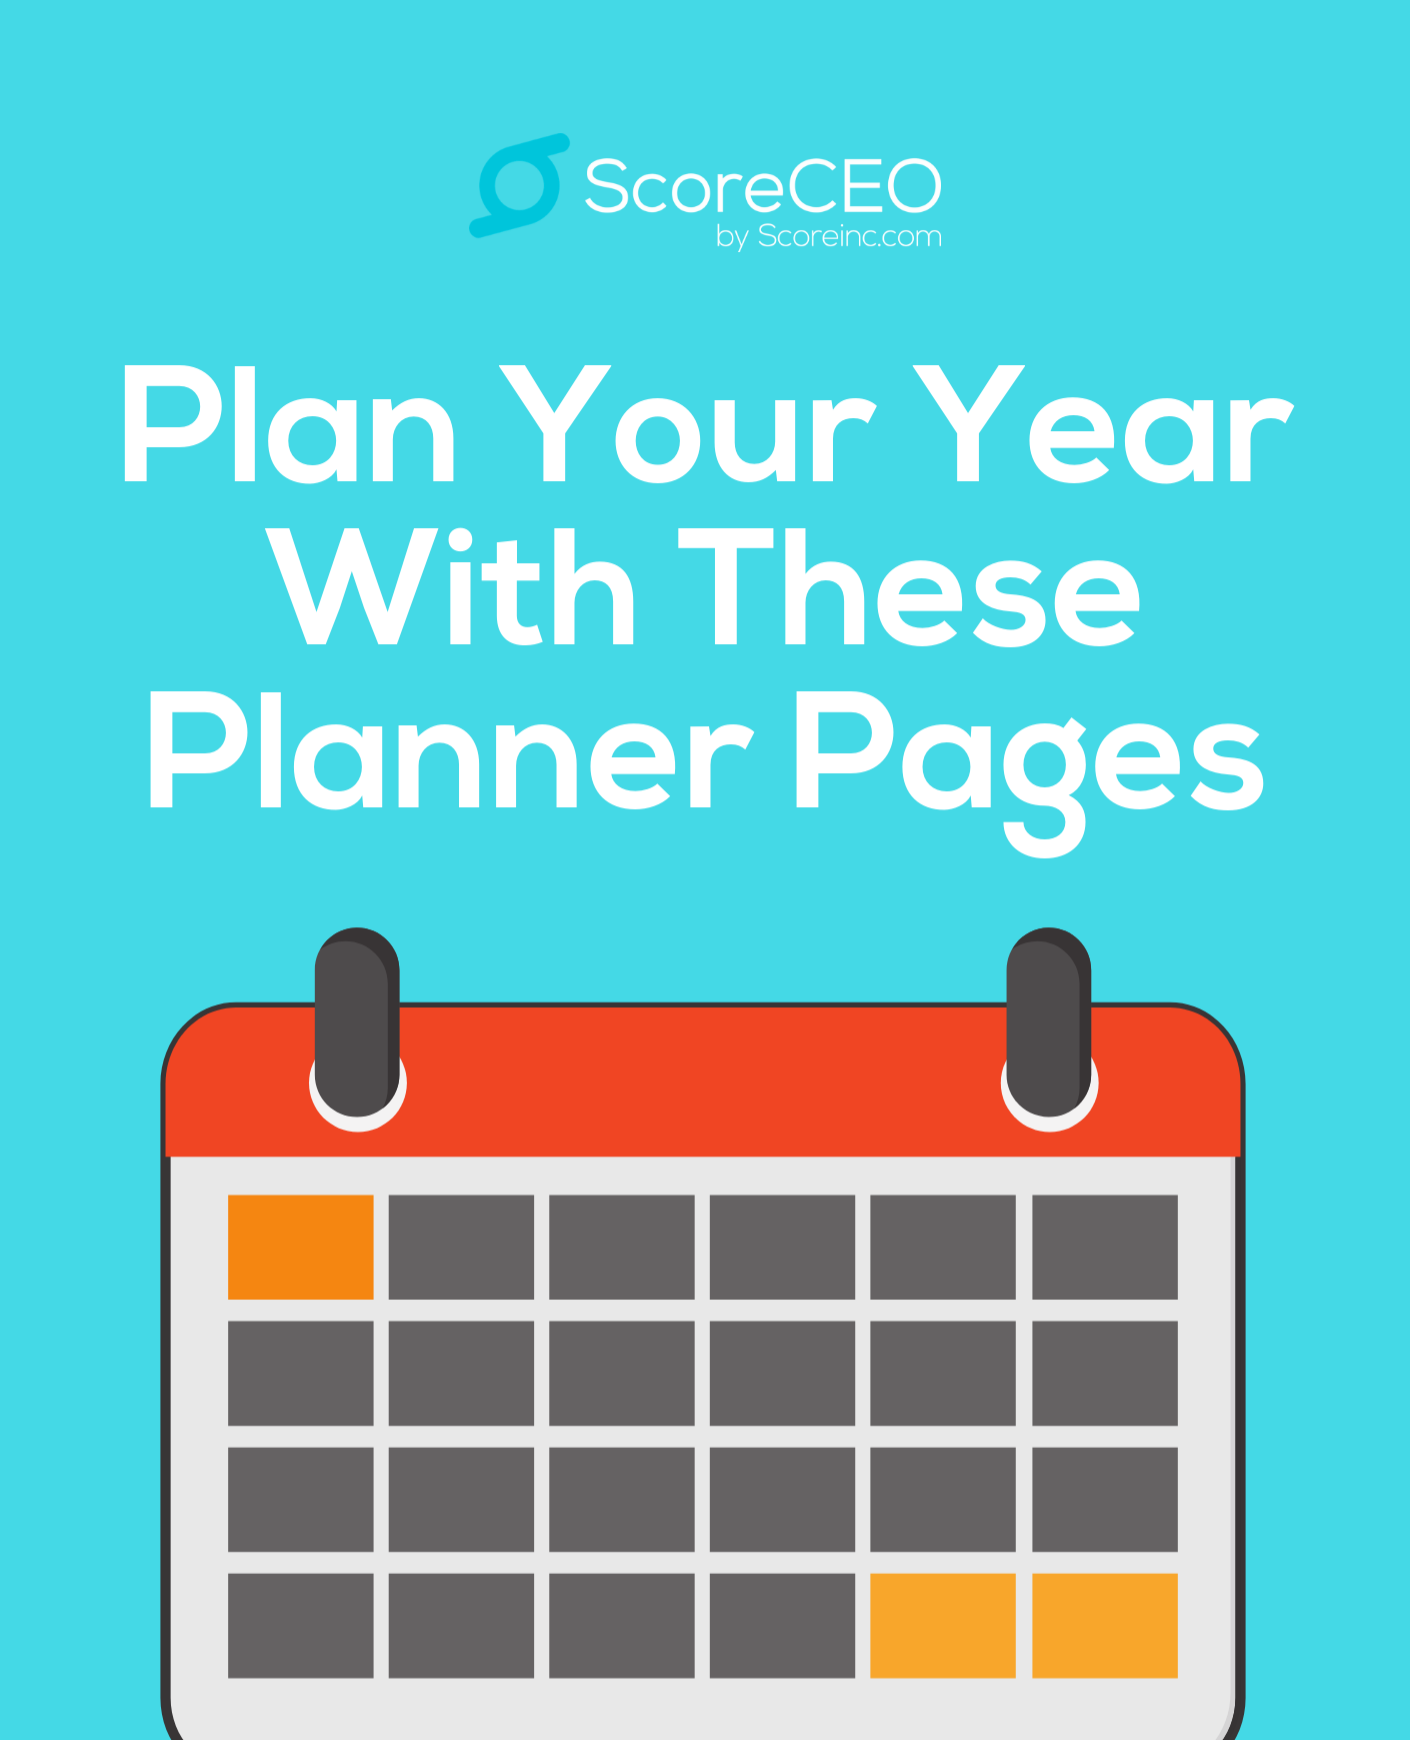 Plan Your Year With These Planner Pages